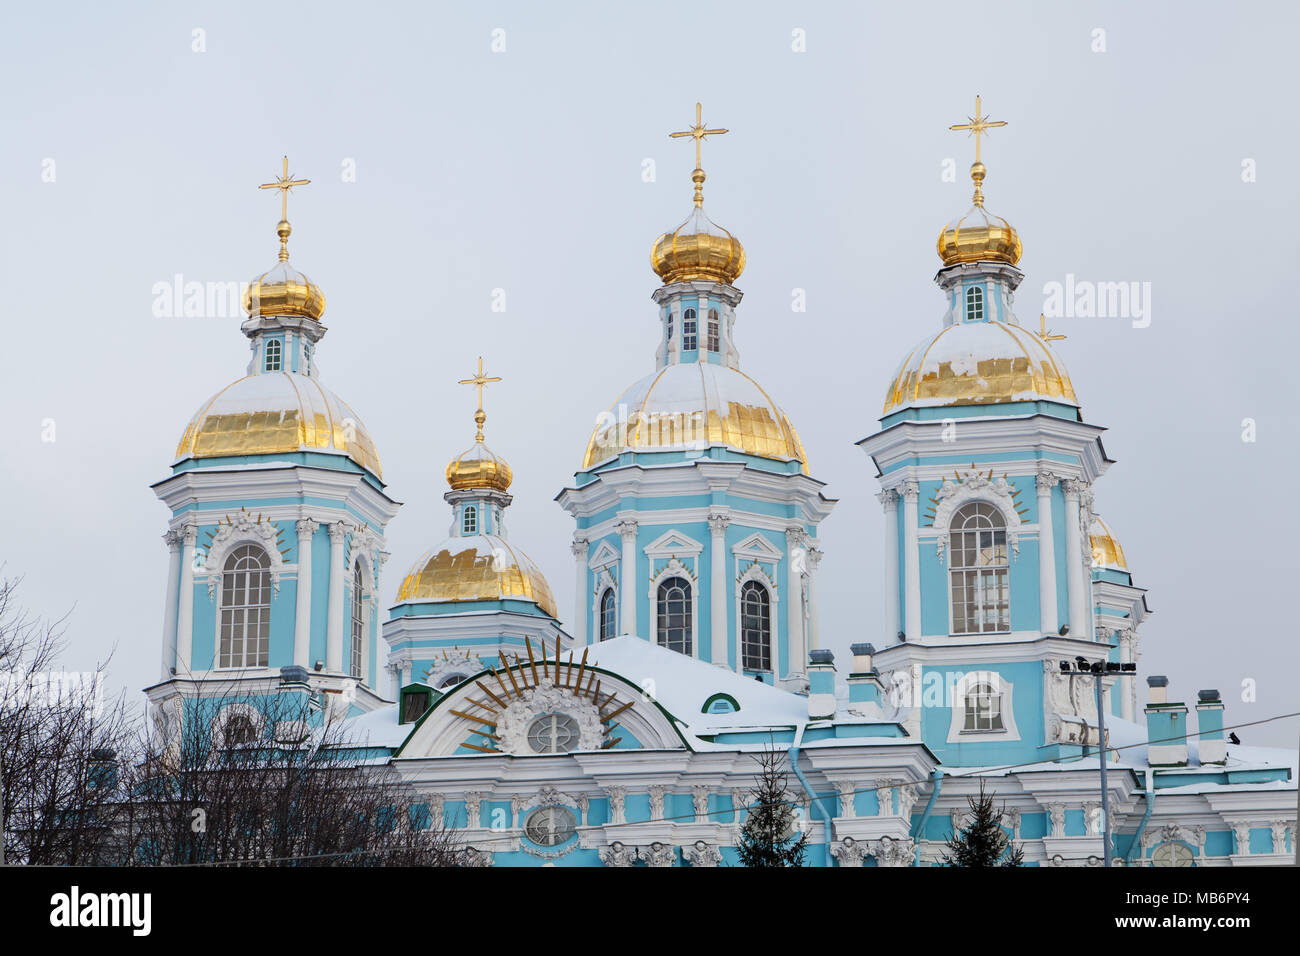 St. Nicholas Naval Cathedral, St. Petersburg, Russia. Stock Photo